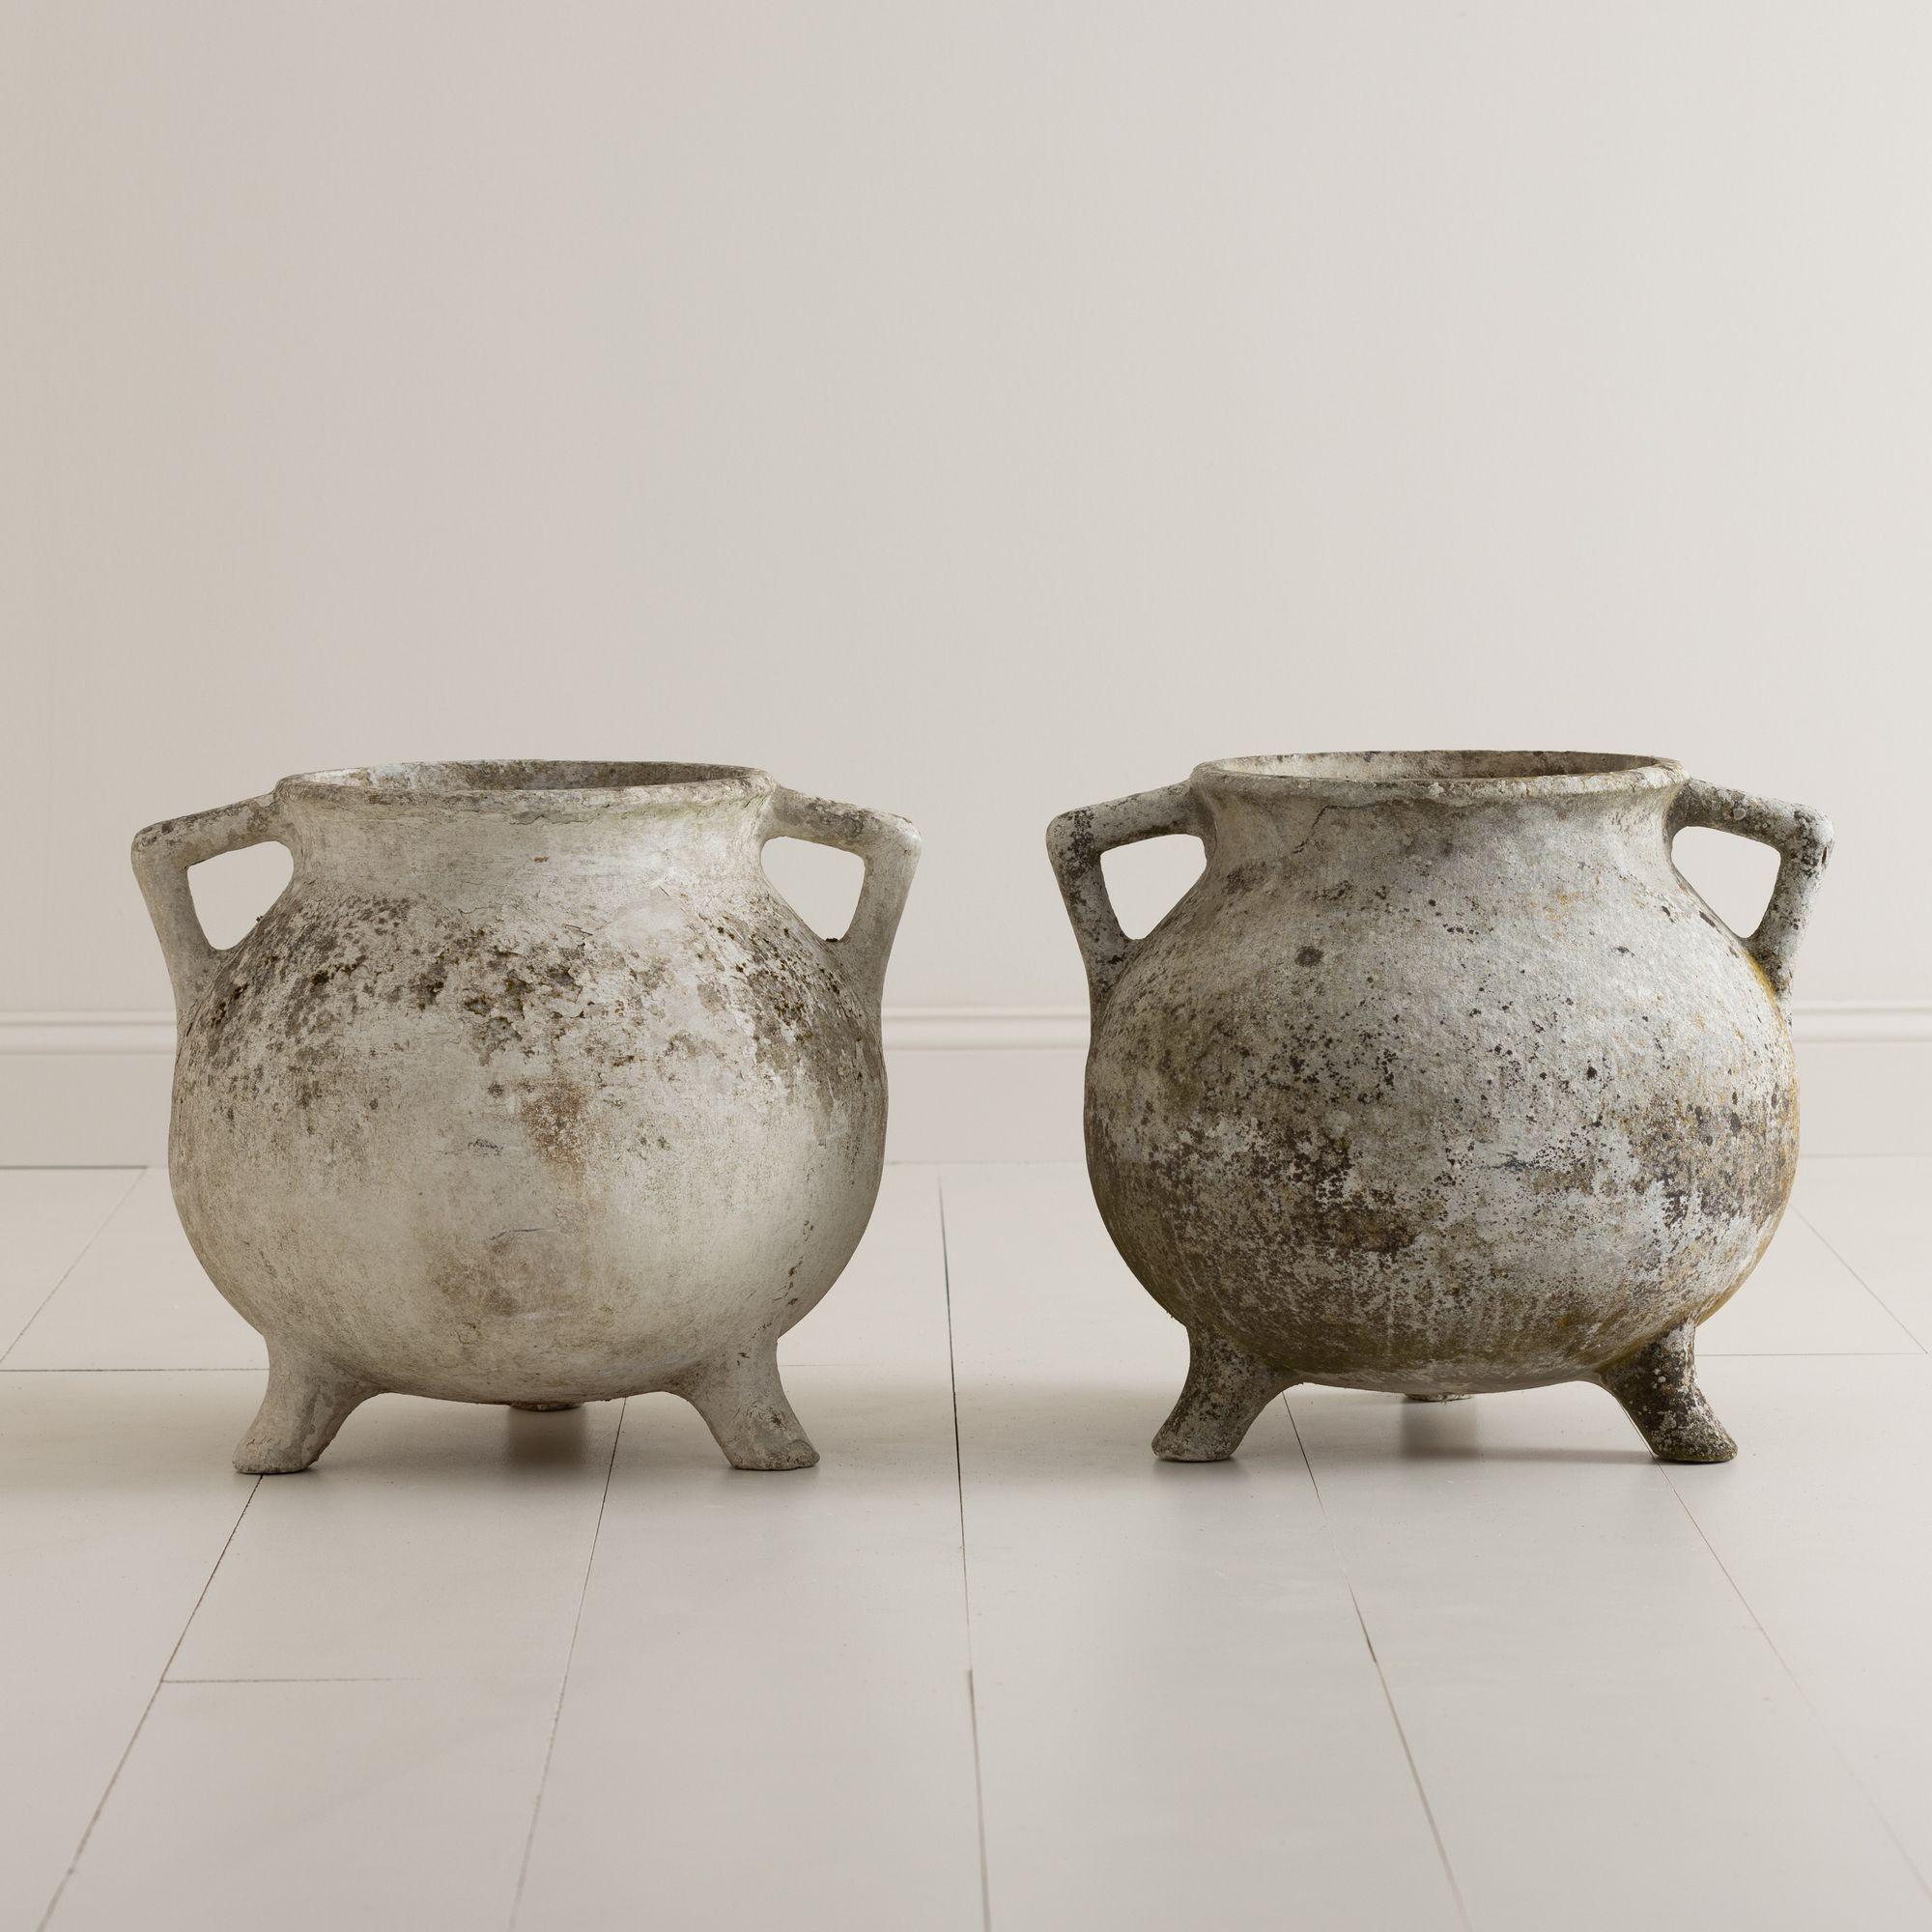 Footed planters with handles in the shape of cauldrons, known as the 'Marmite' model by Swiss designer Willy Guhl. These beautifully weathered planters were produced by Eternit in the 1950s - 1960s. Made of fiber cement, a durable and lightweight